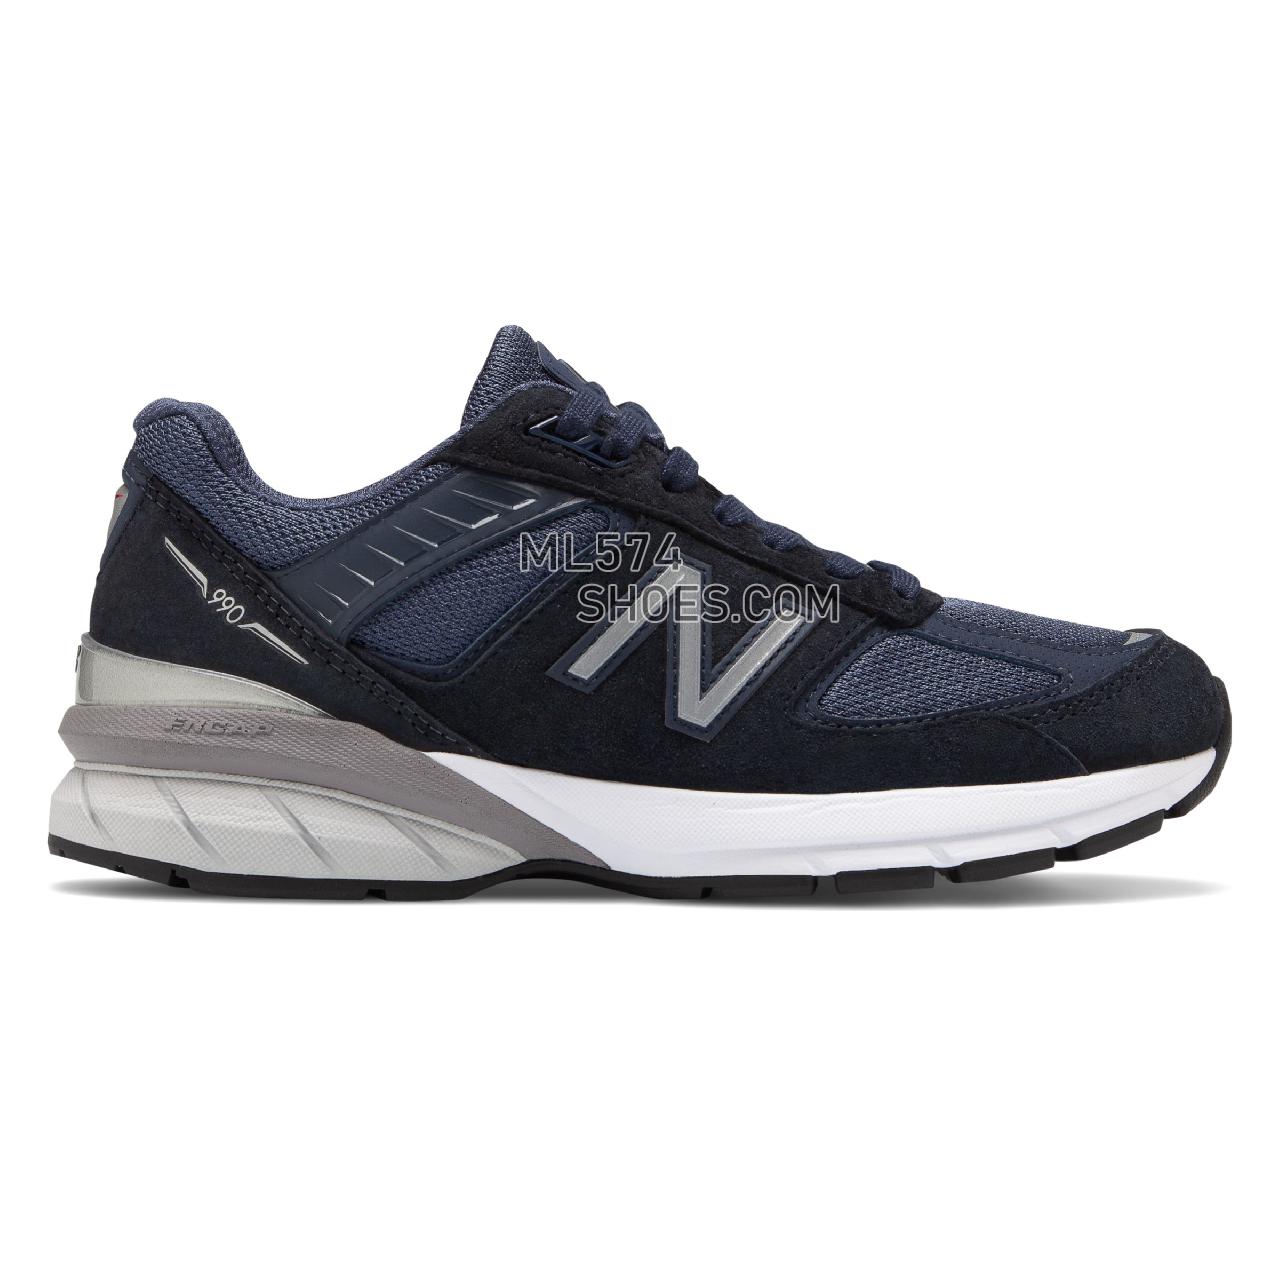 New Balance 990v5 Made in US - Women's Neutral Running - Navy with Silver - W990NV5